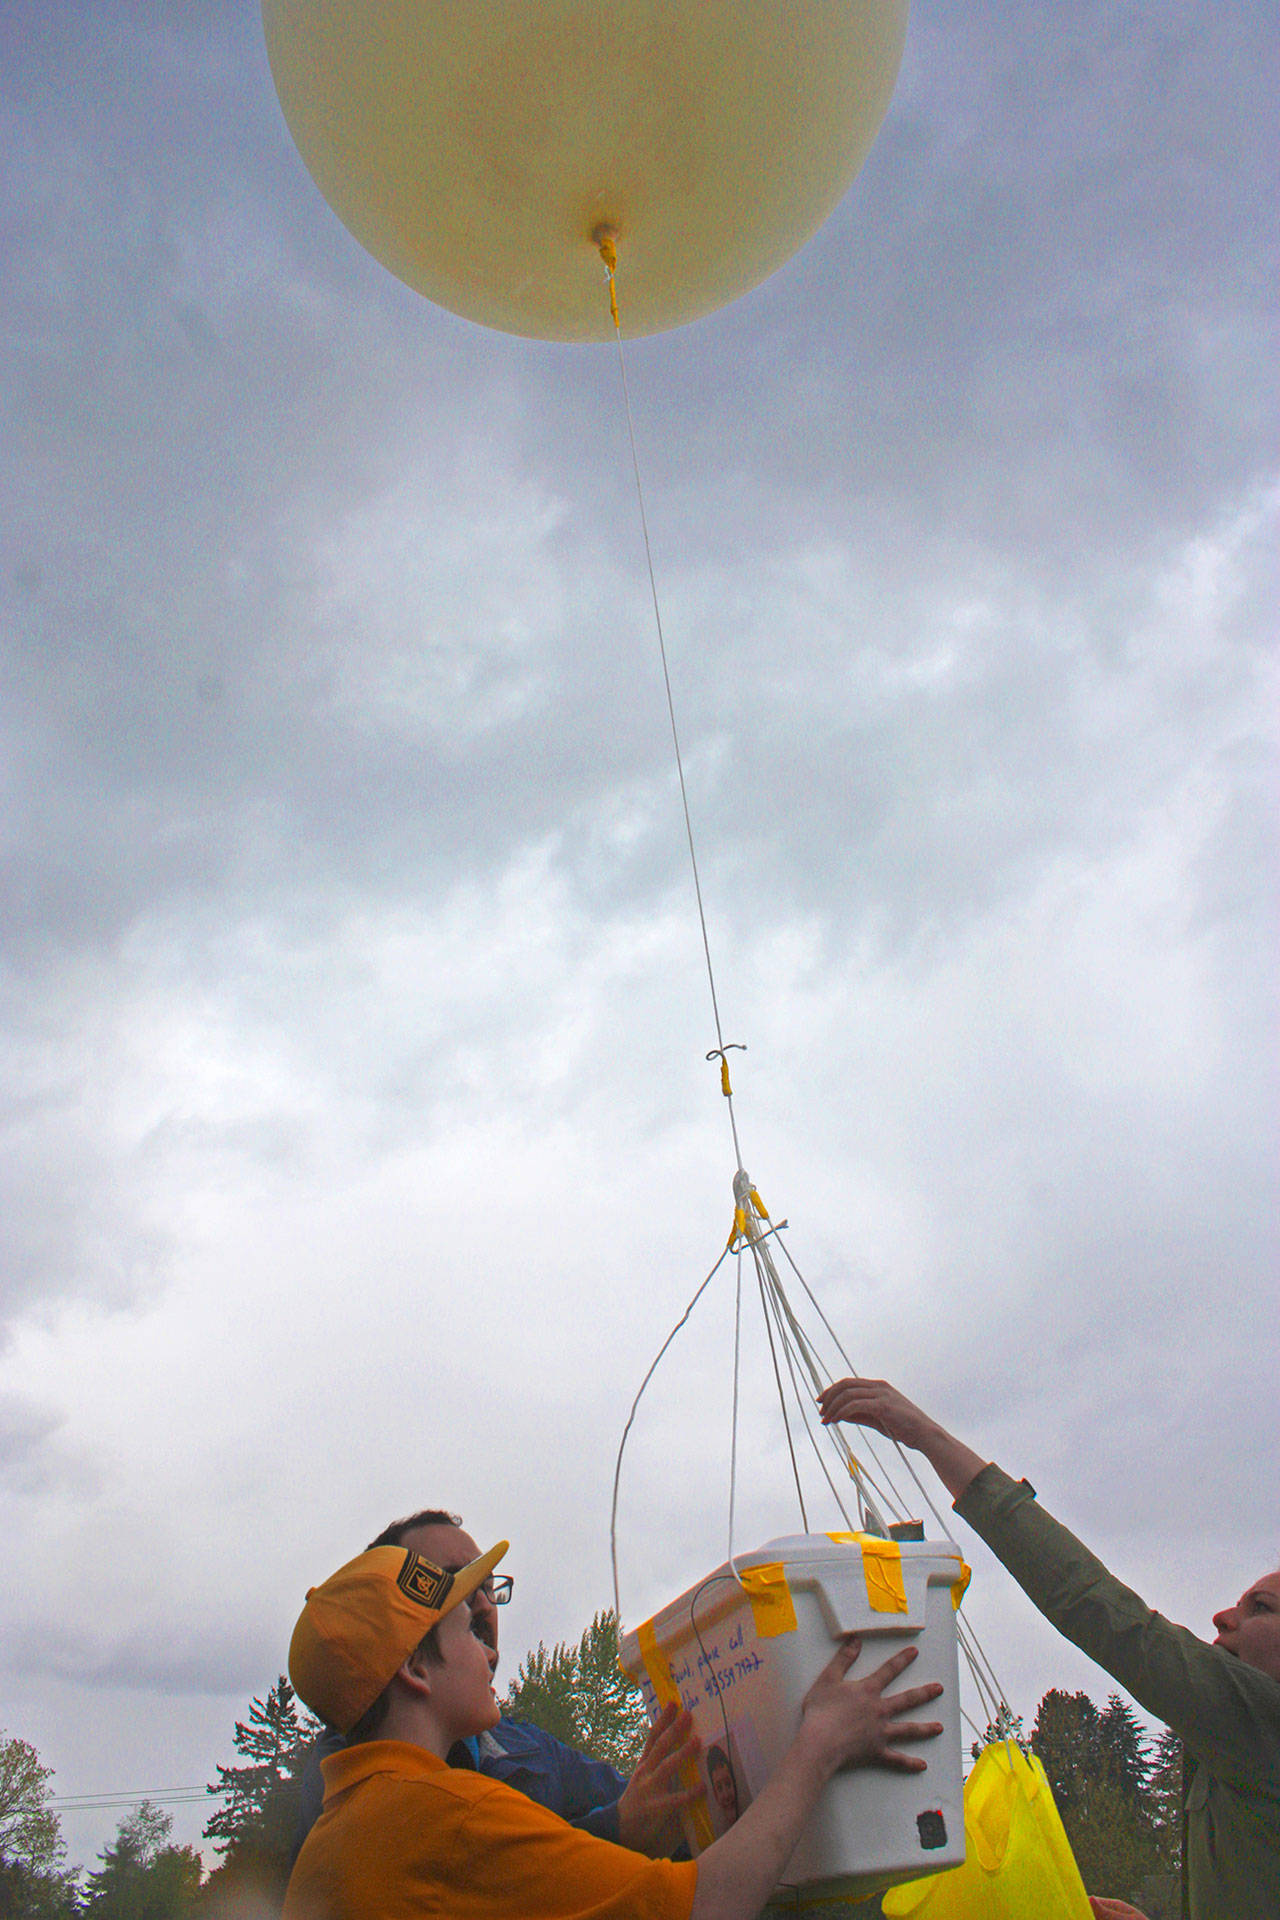 Ryelee Patten, an eighth-grader at the school, joins Eli Sheldon, the school’s Computational Thinking program manager, and volunteer Chrissie Grover-Roybal to release the weather balloon earlier Tuesday. MARK KLAAS, Kent Reporter